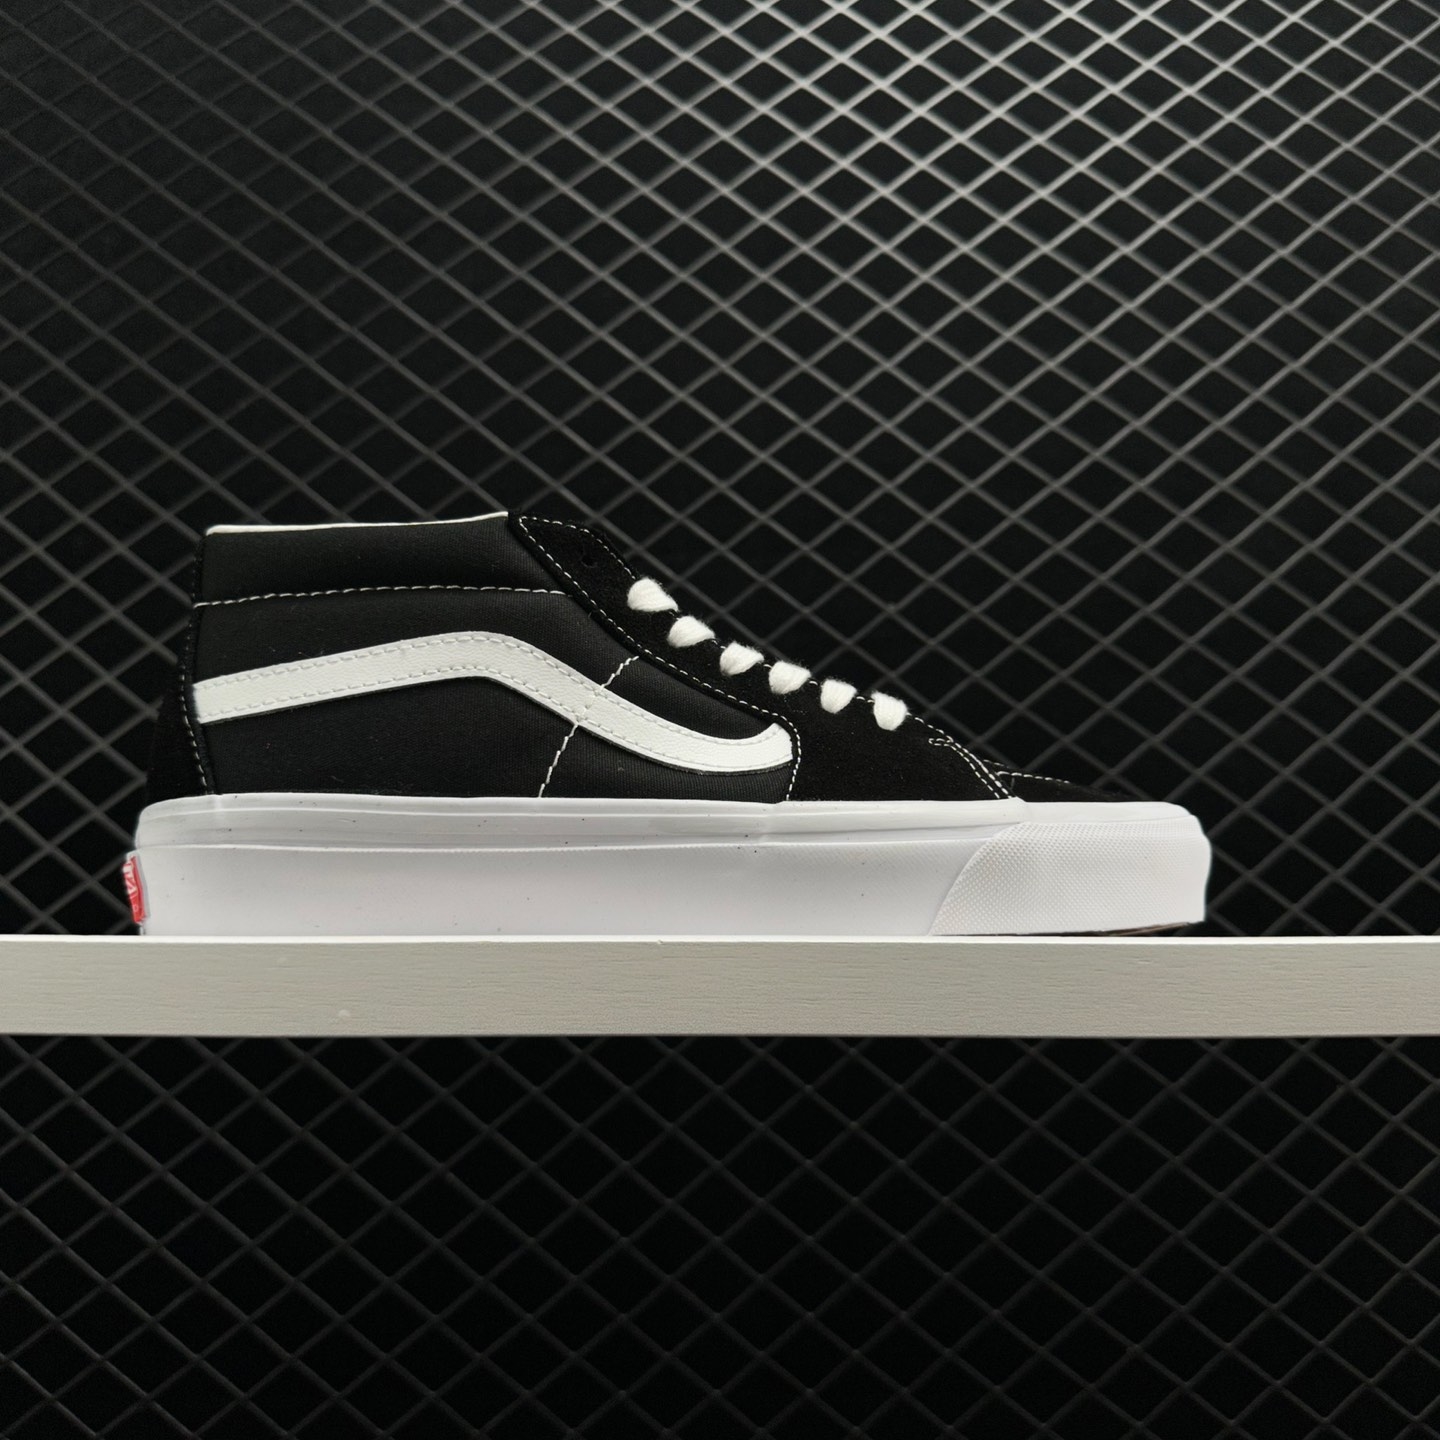 Vans Sk8-Mid OG LX 'Black White' - Stylish and Classic Mid-Top Sneakers